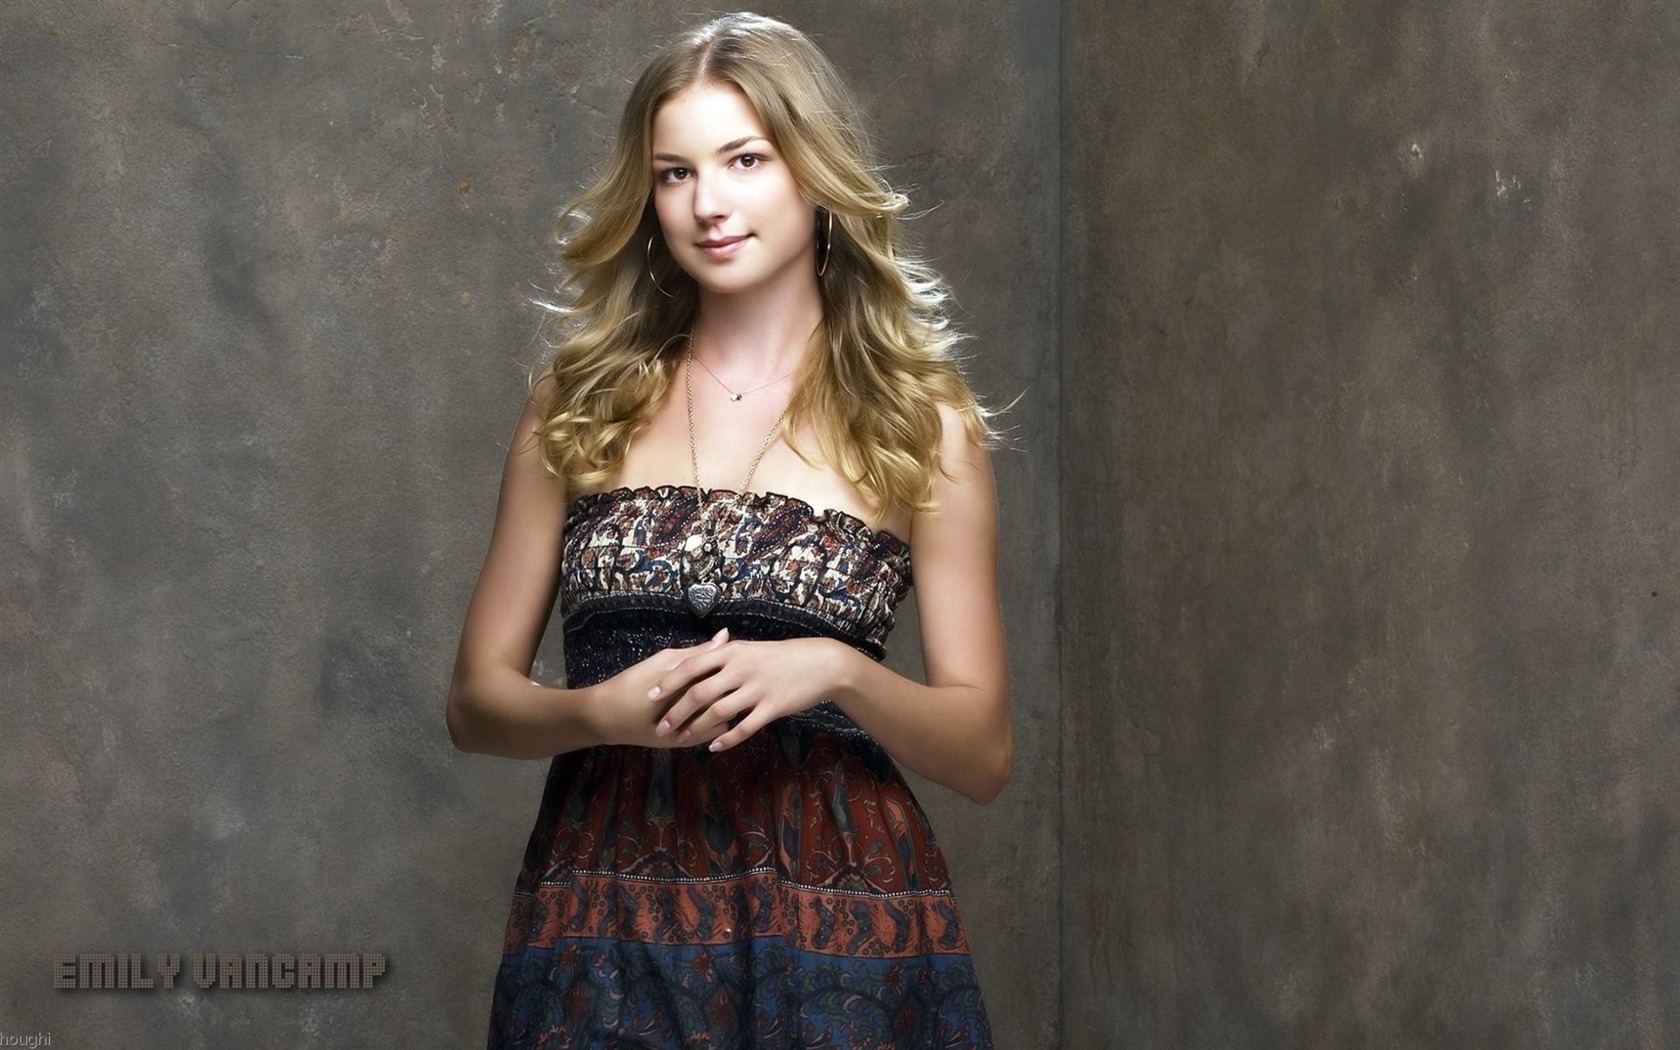 Emily VanCamp #008 - 1680x1050 Wallpapers Pictures Photos Images